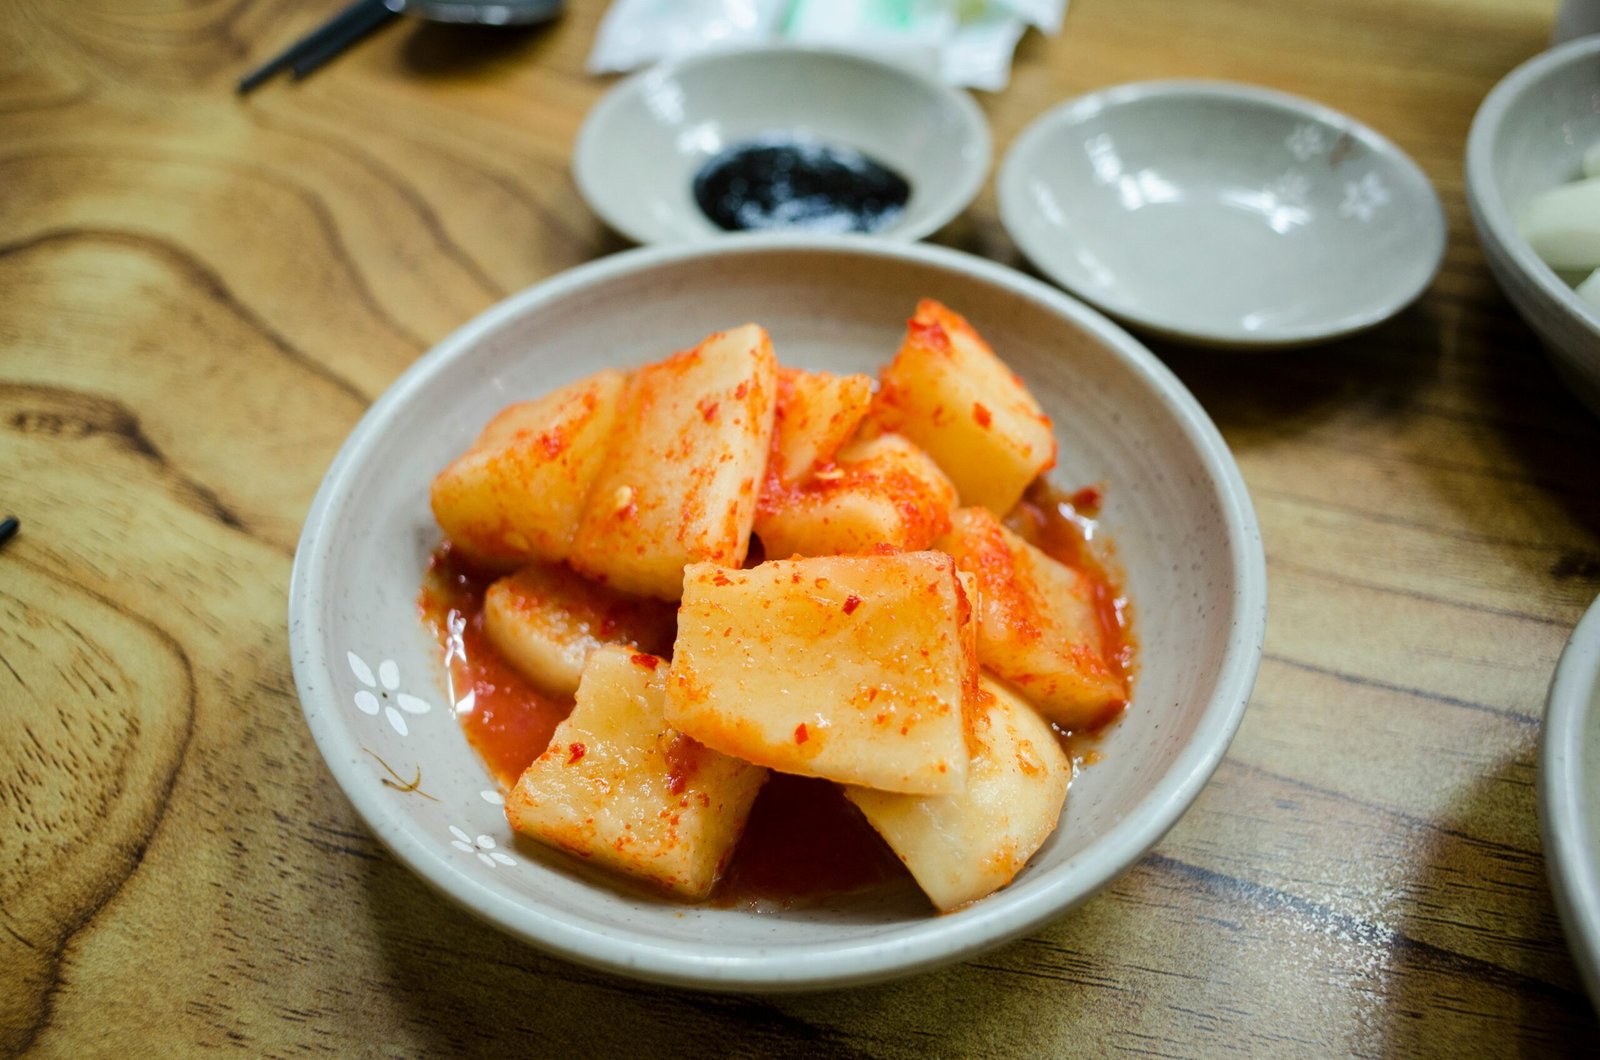 What Are Some Innovative Ideas For Using Korean Pickles In Dishes?